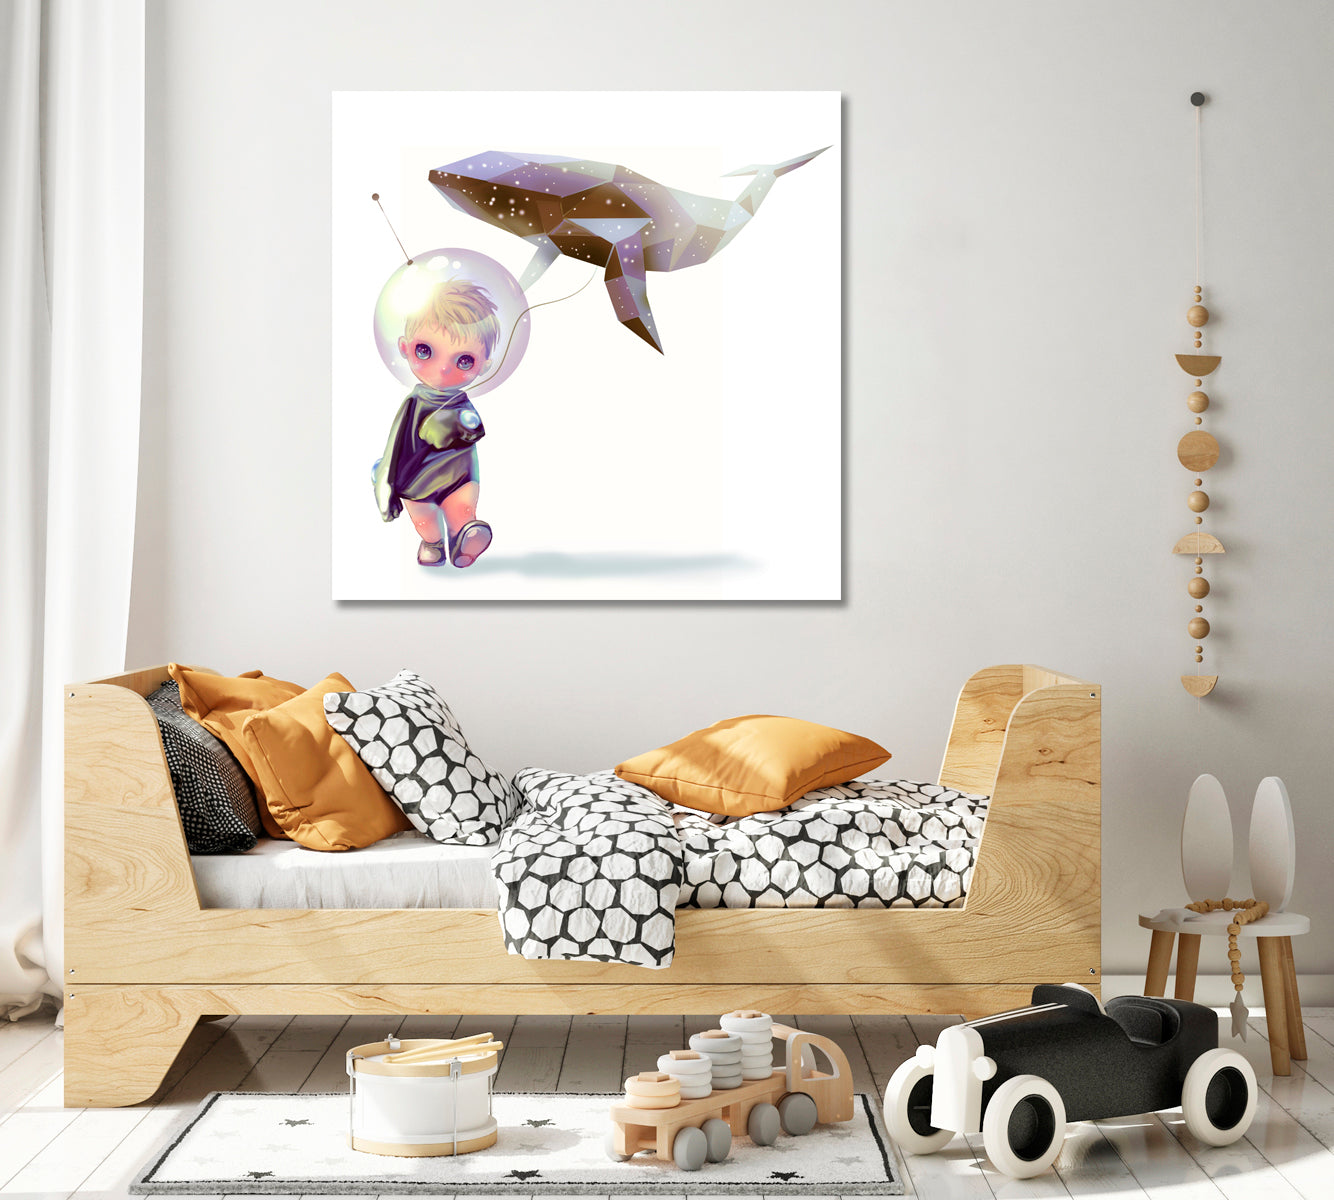 Little Astronaut with Flying Whale Canvas Print ArtLexy 1 Panel 12"x12" inches 